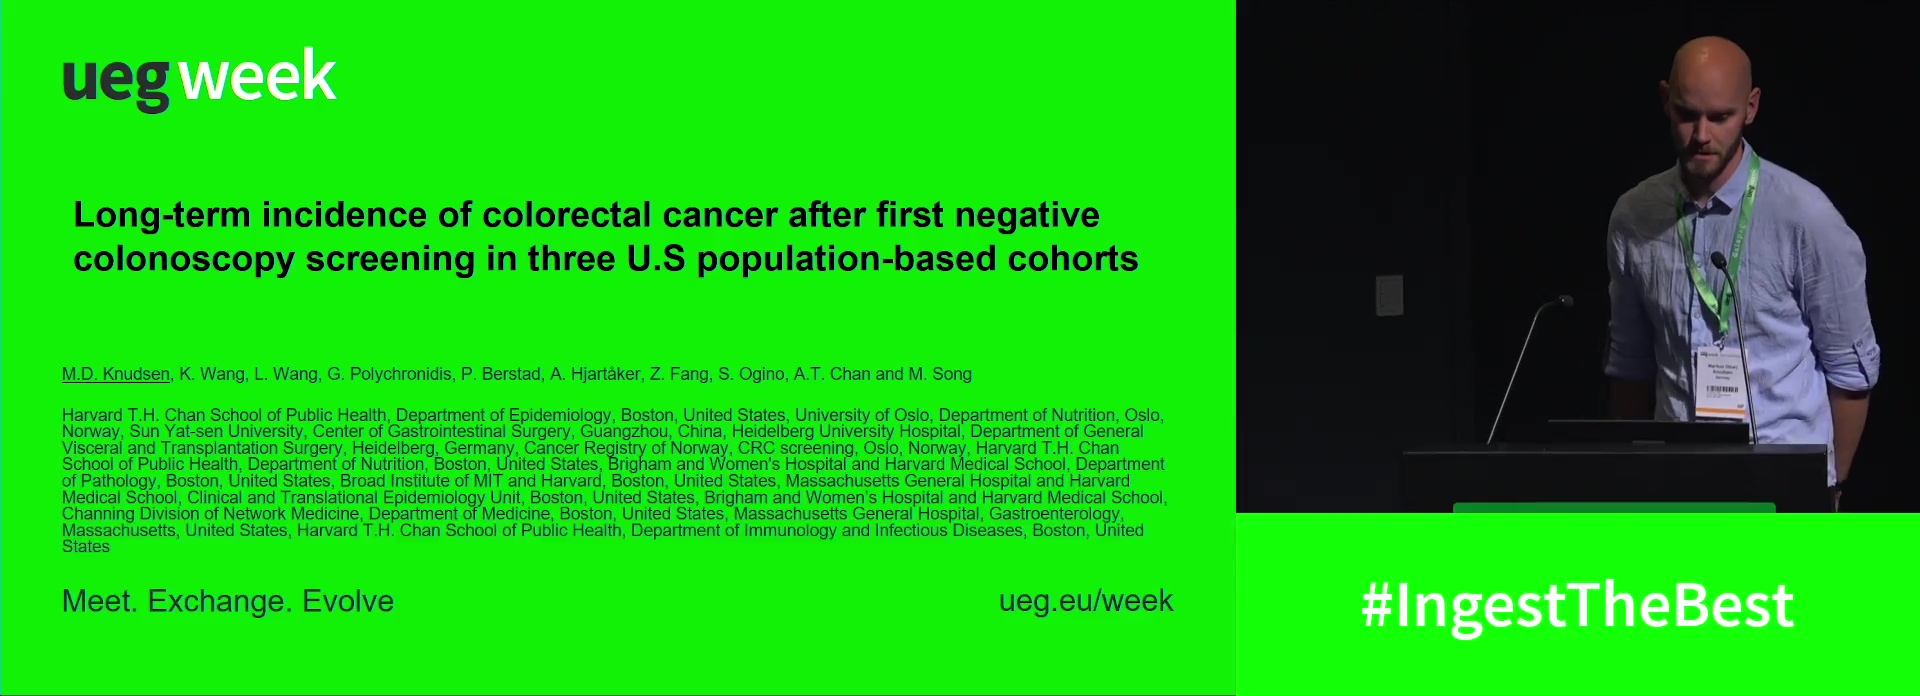 LONG-TERM INCIDENCE AND MORTALITY OF COLORECTAL CANCER AFTER NEGATIVE COLONOSCOPY SCREENING IN THREE U.S POPULATION-BASED COHORTS